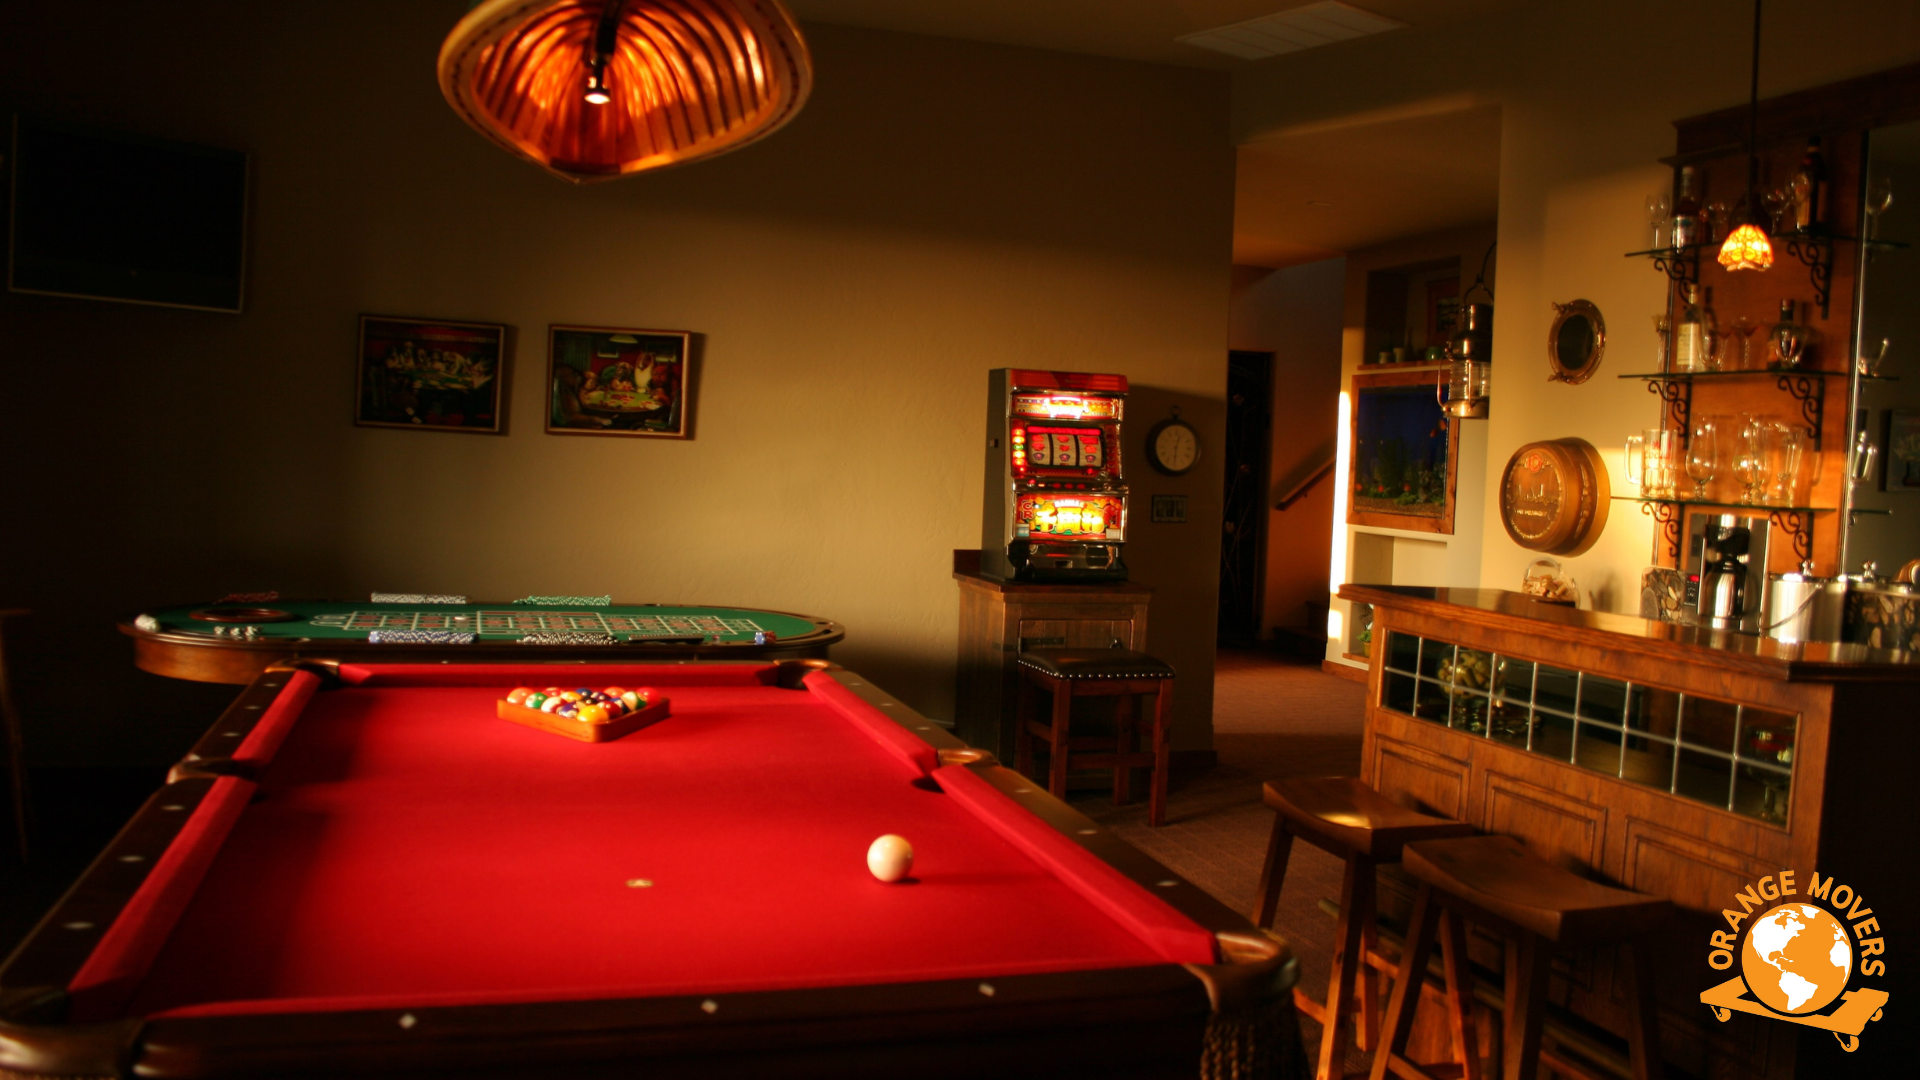 Pool Table Movers Companies in Pompano Beach Florida